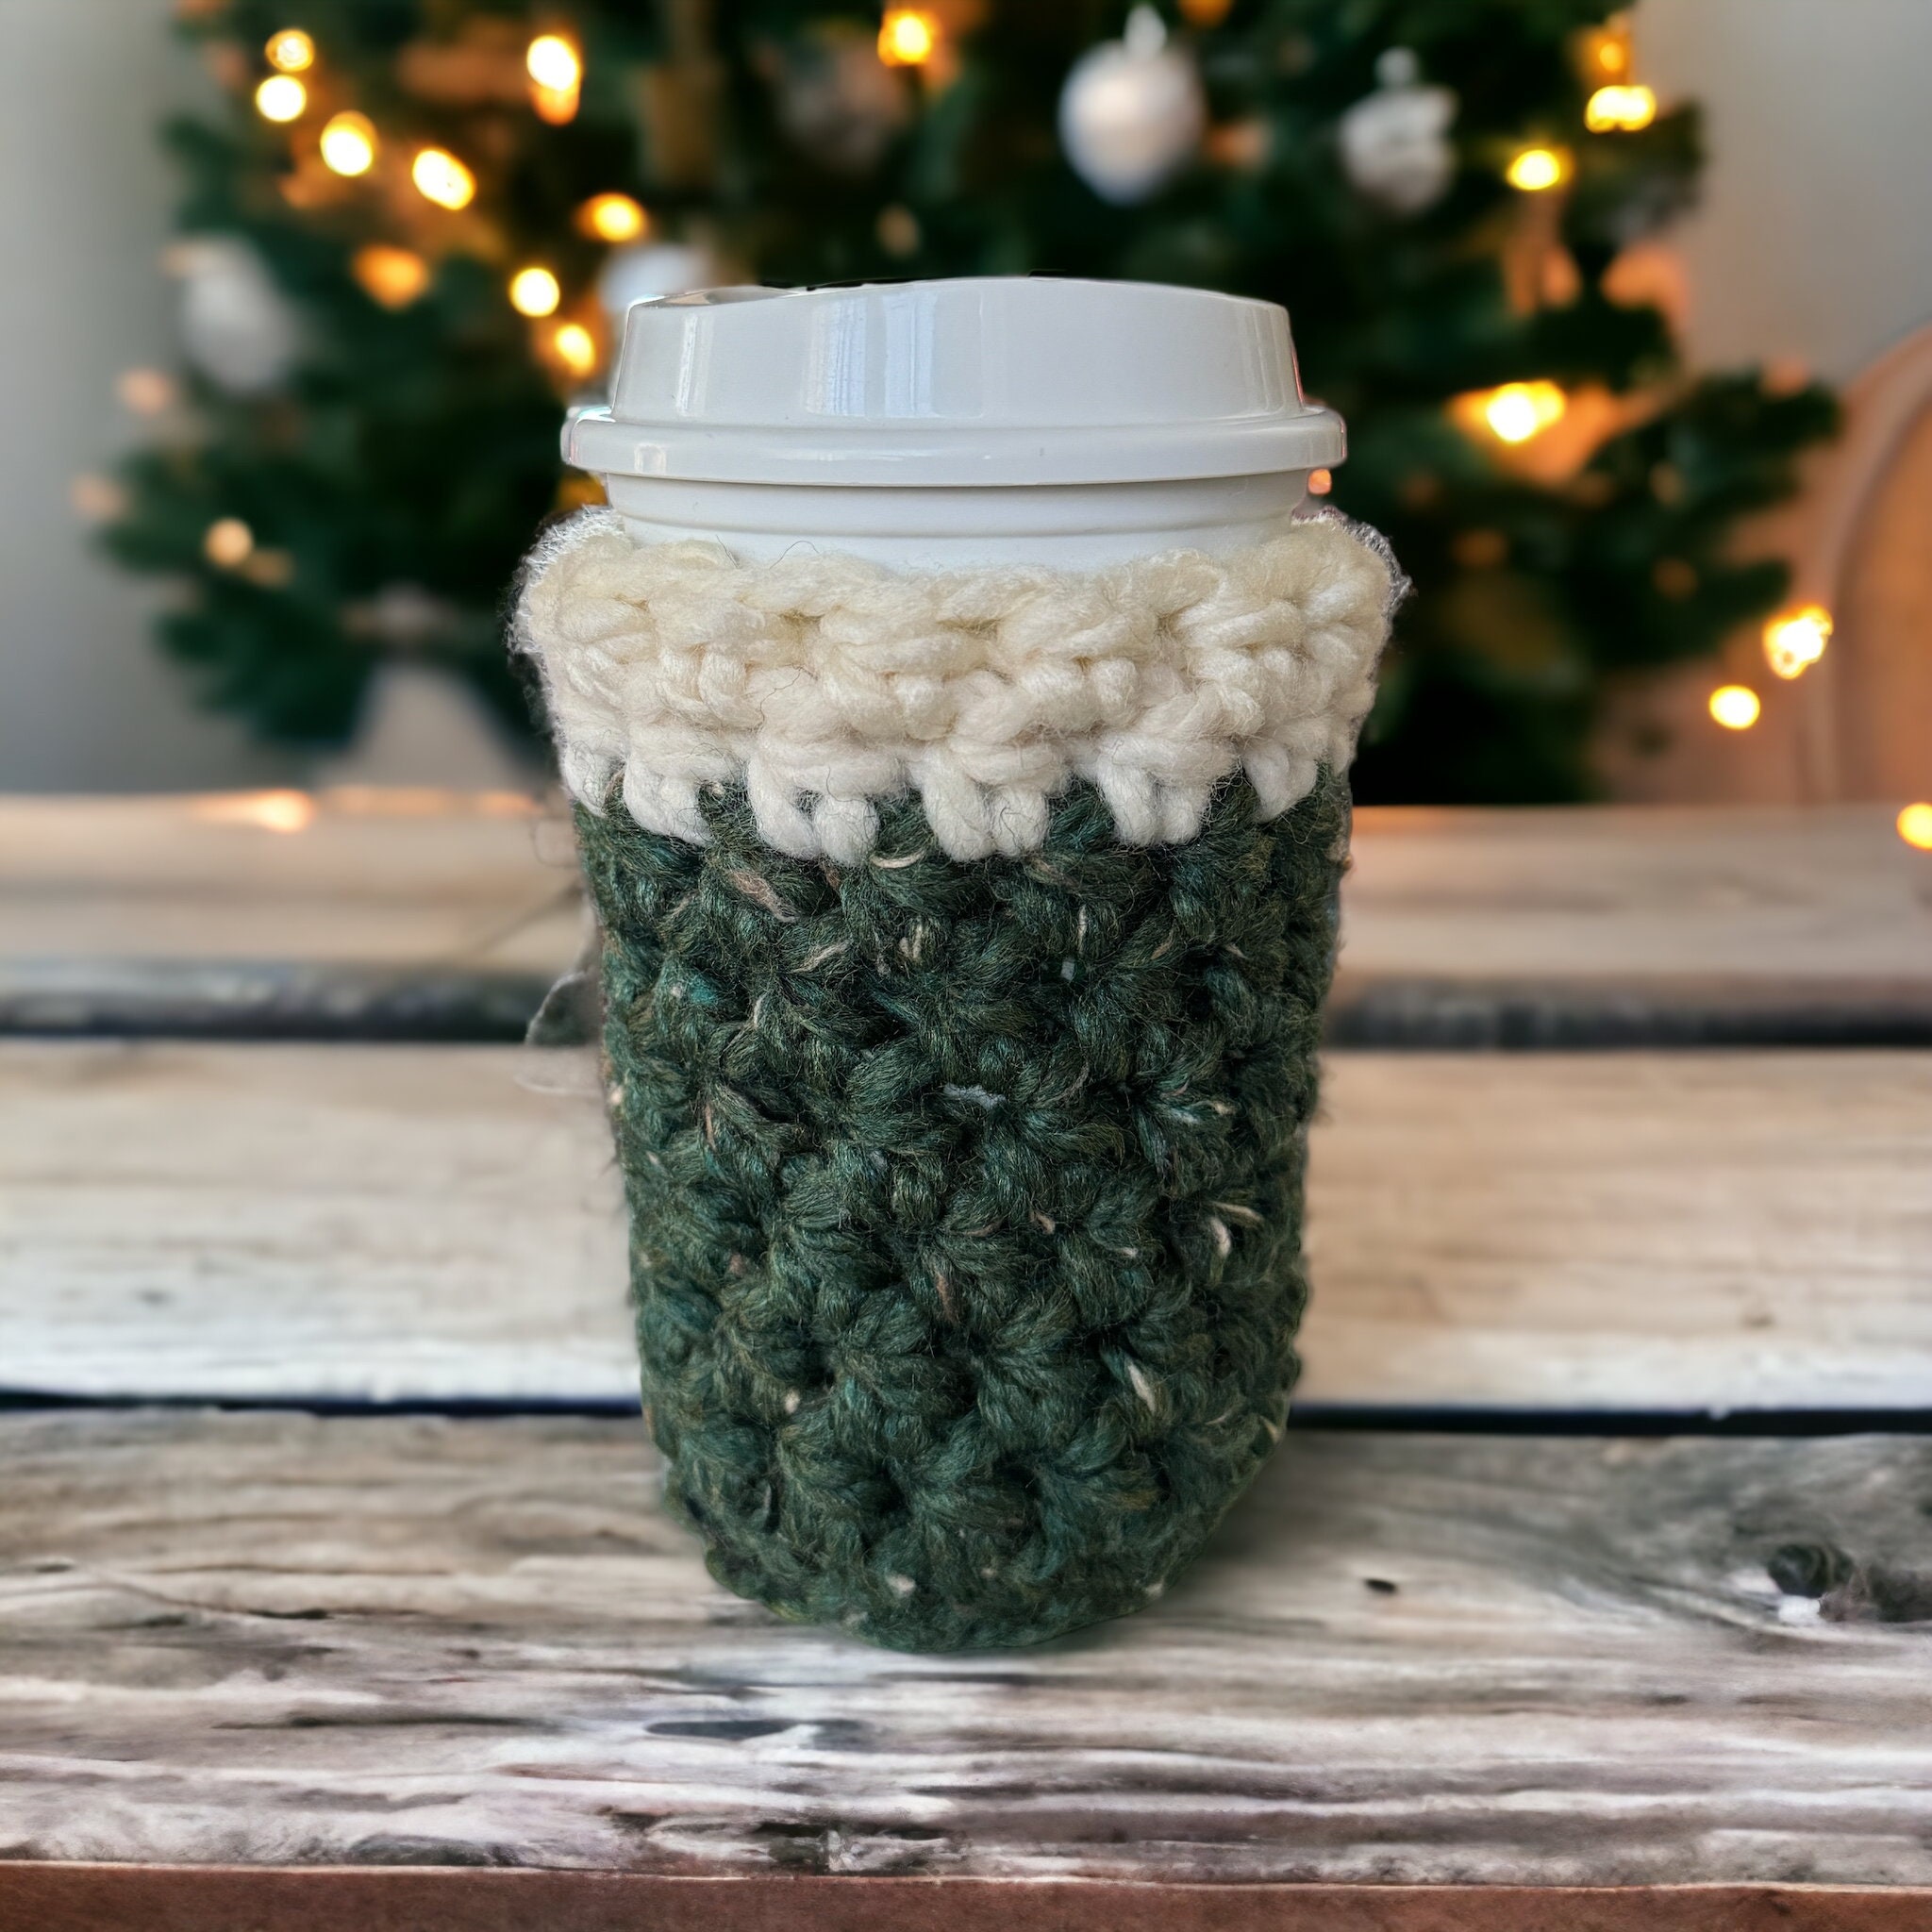 Grinch Cup Cozy, Christmas Cup Sleeve, Grinch Cozy, Iced Coffee Kozy,  Fabric Koozie, Insulated Christmas Cozy, Beverage Cover, Drink Cuff 